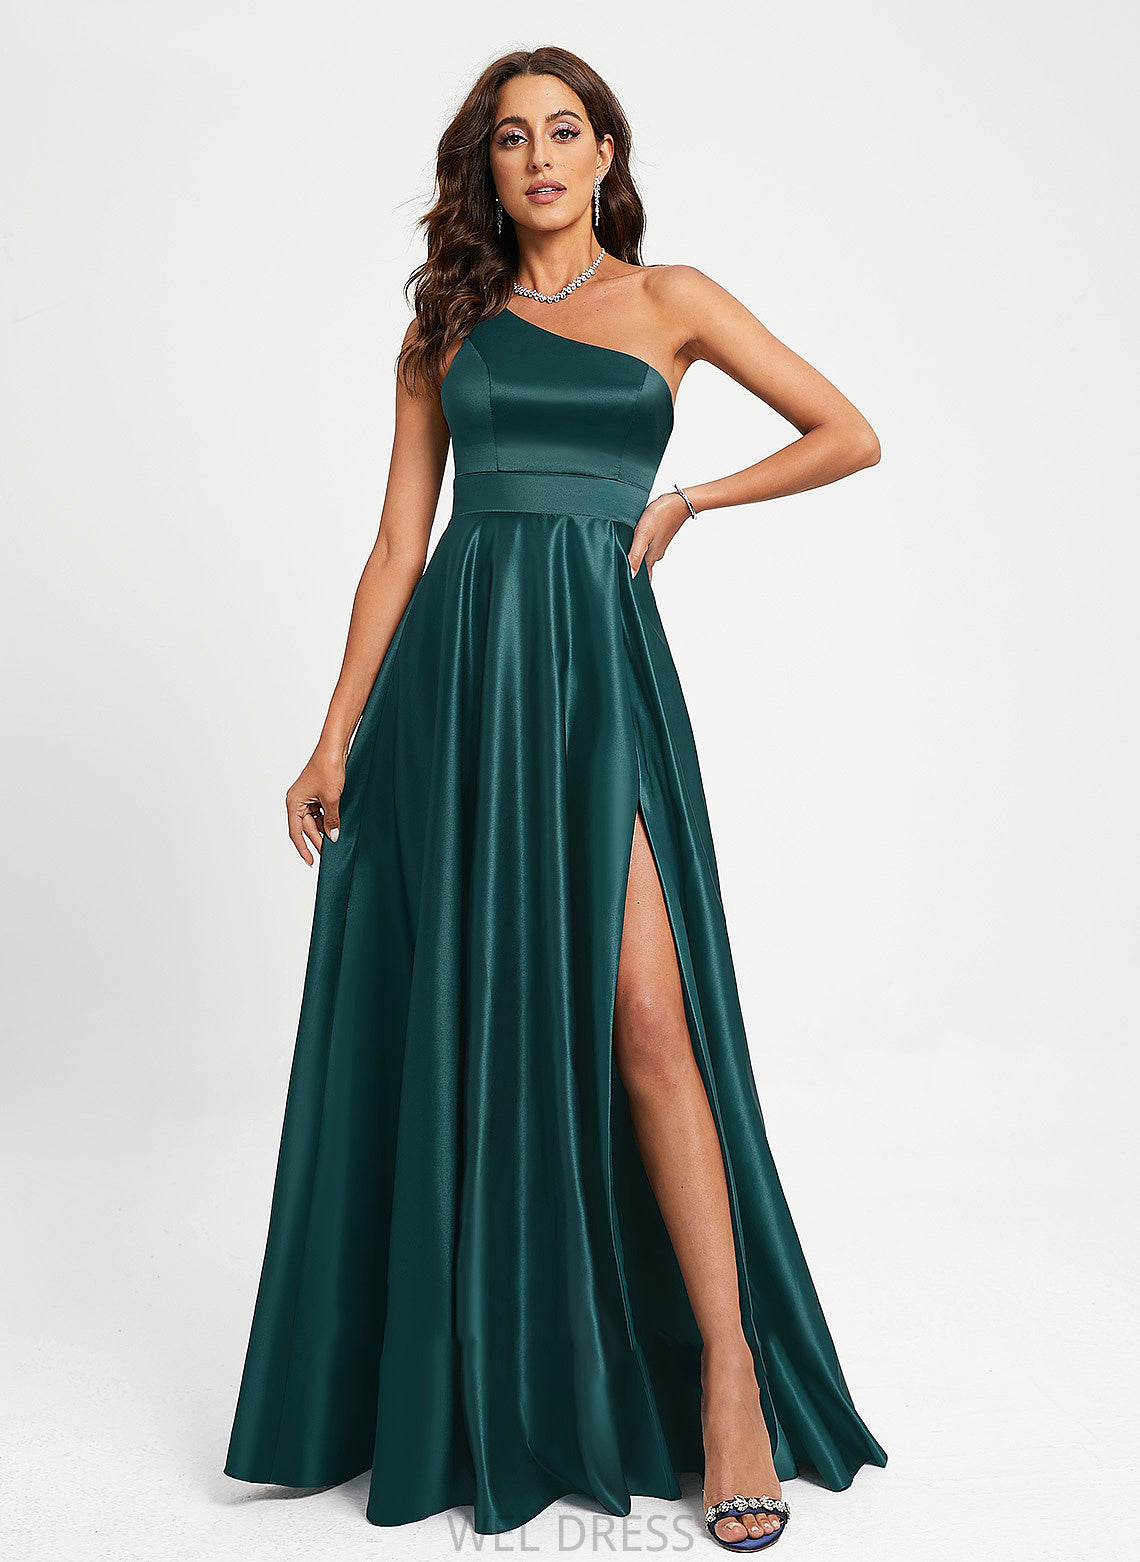 Prom Dresses Floor-Length With Beading One-Shoulder A-Line Satin Cristina